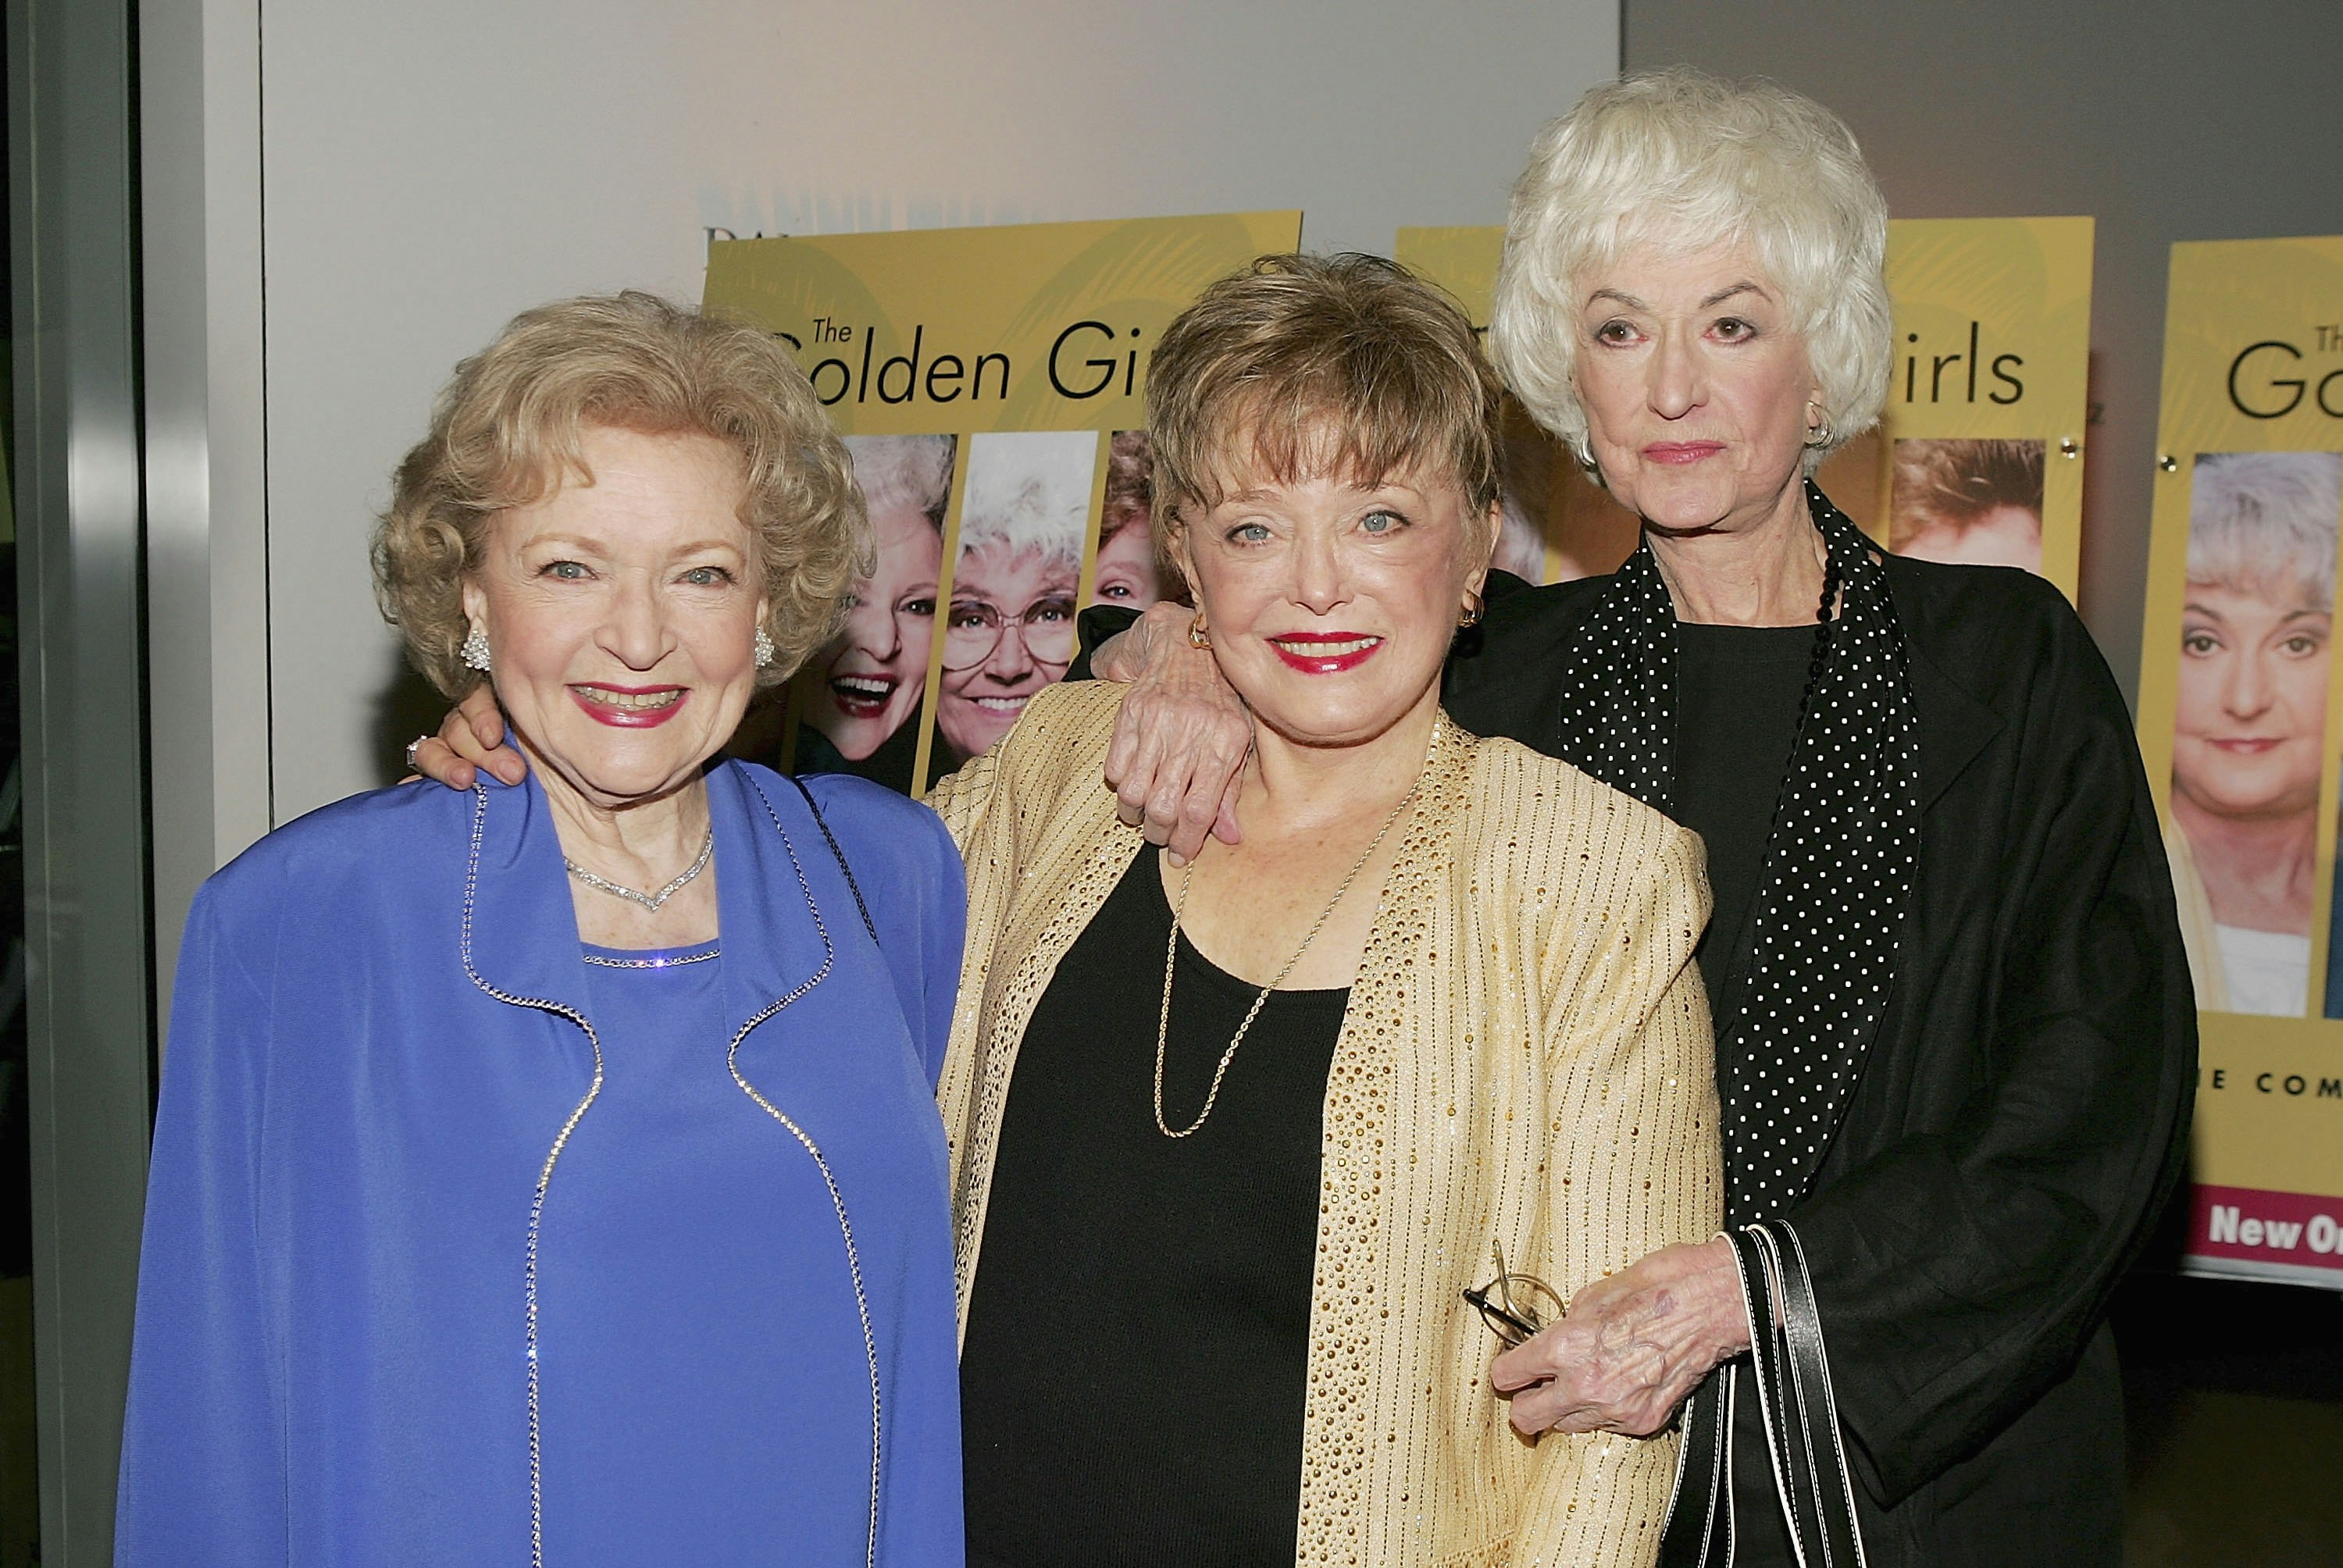 Travel News - DVD Release Party For "The Golden Girls"